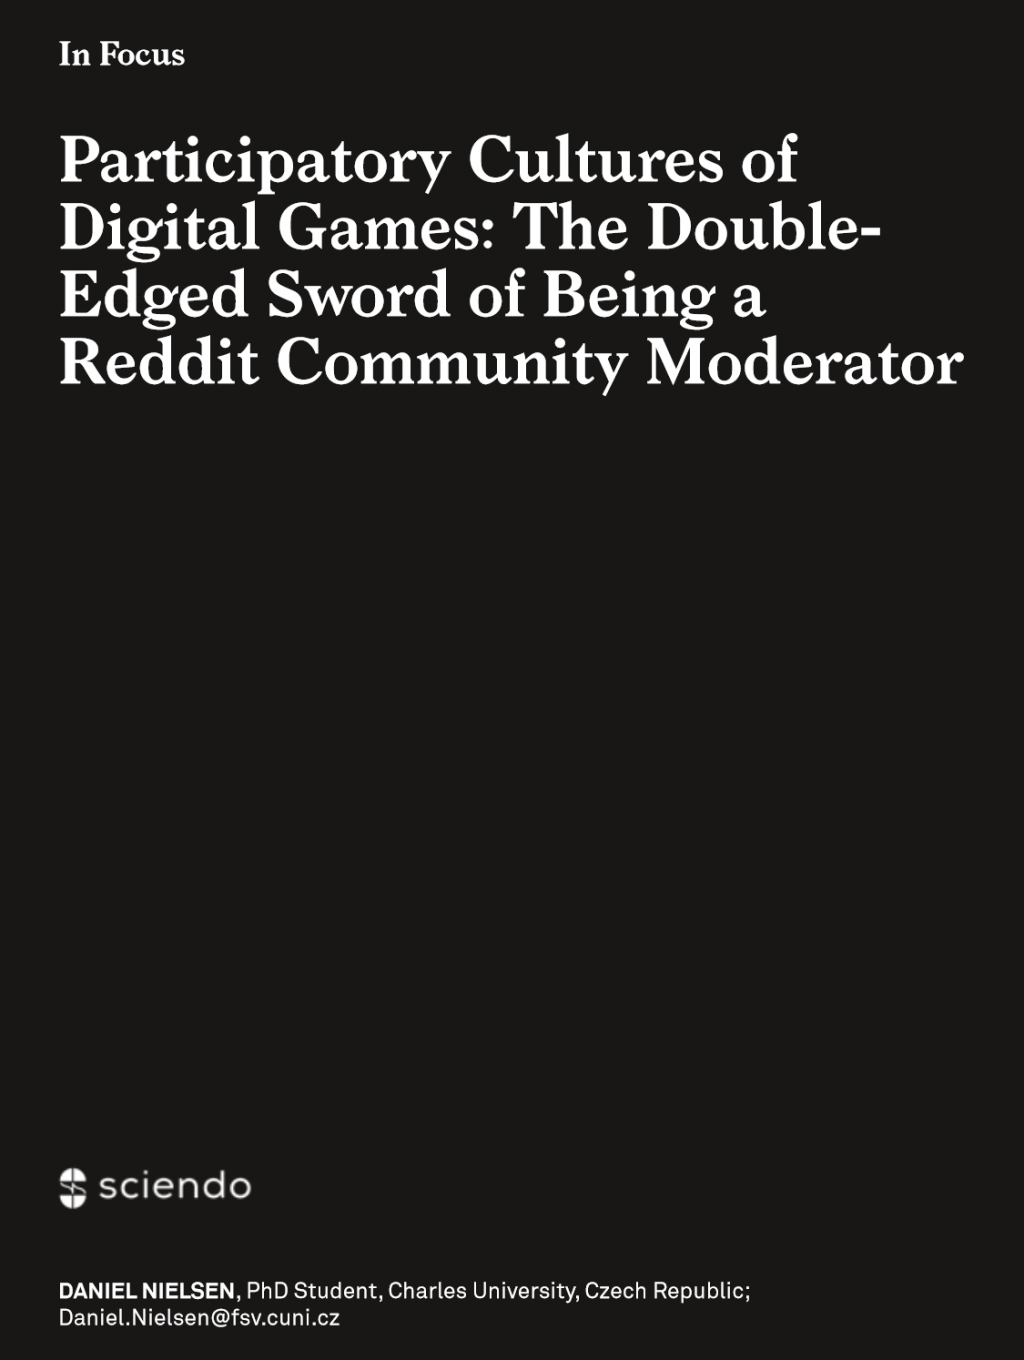 Participatory Cultures of Digital Games: The Double-Edged Sword of Being a Reddit Community Moderator